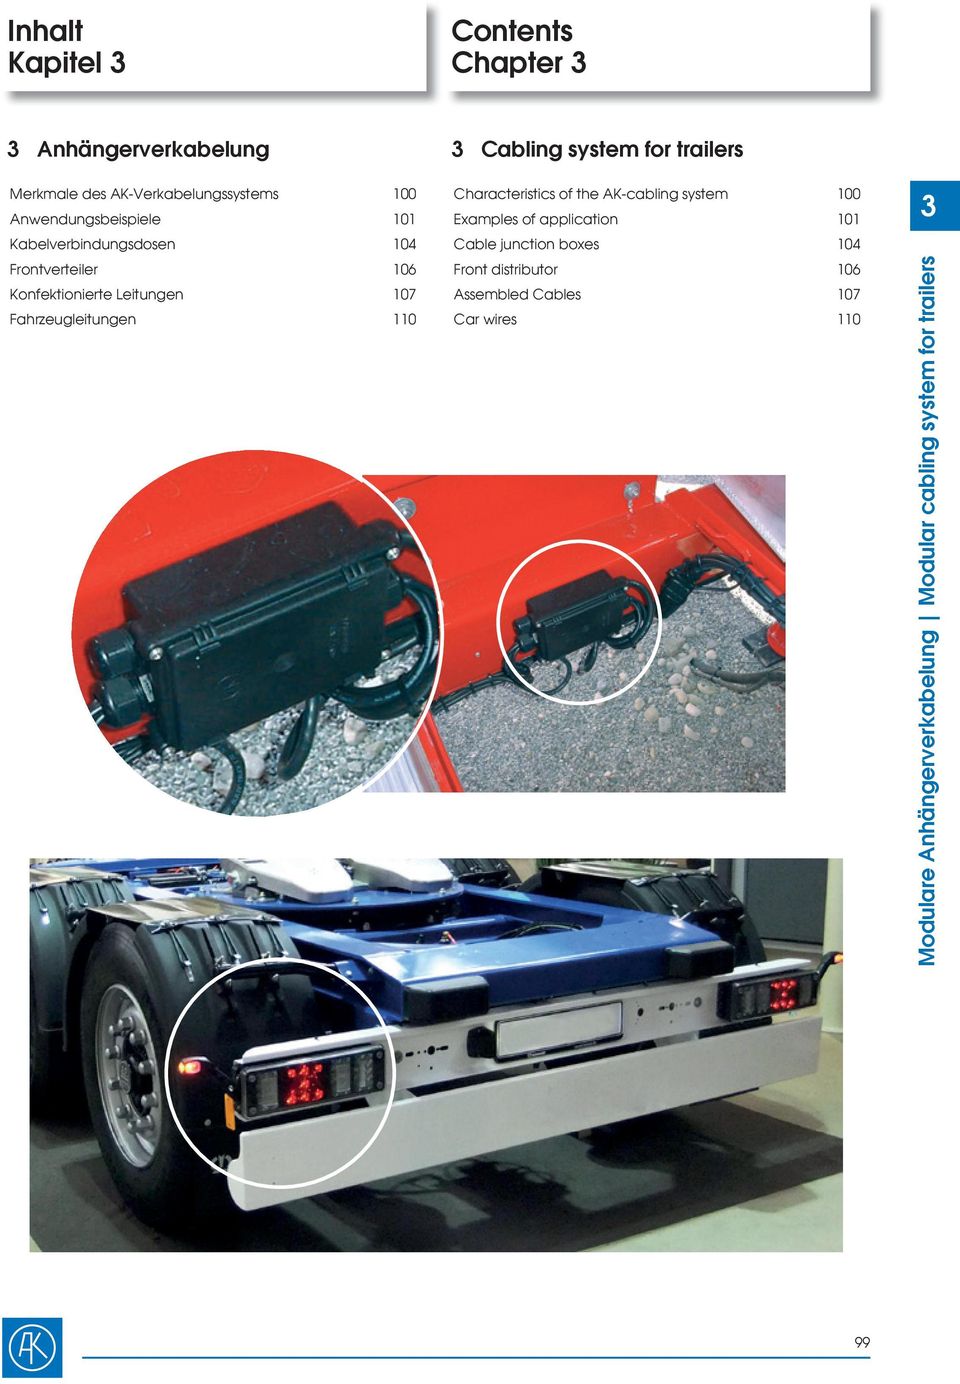 Fahrzeugleitungen 110 Cabling system for trailers Characteristics of the AK-cabling system 100